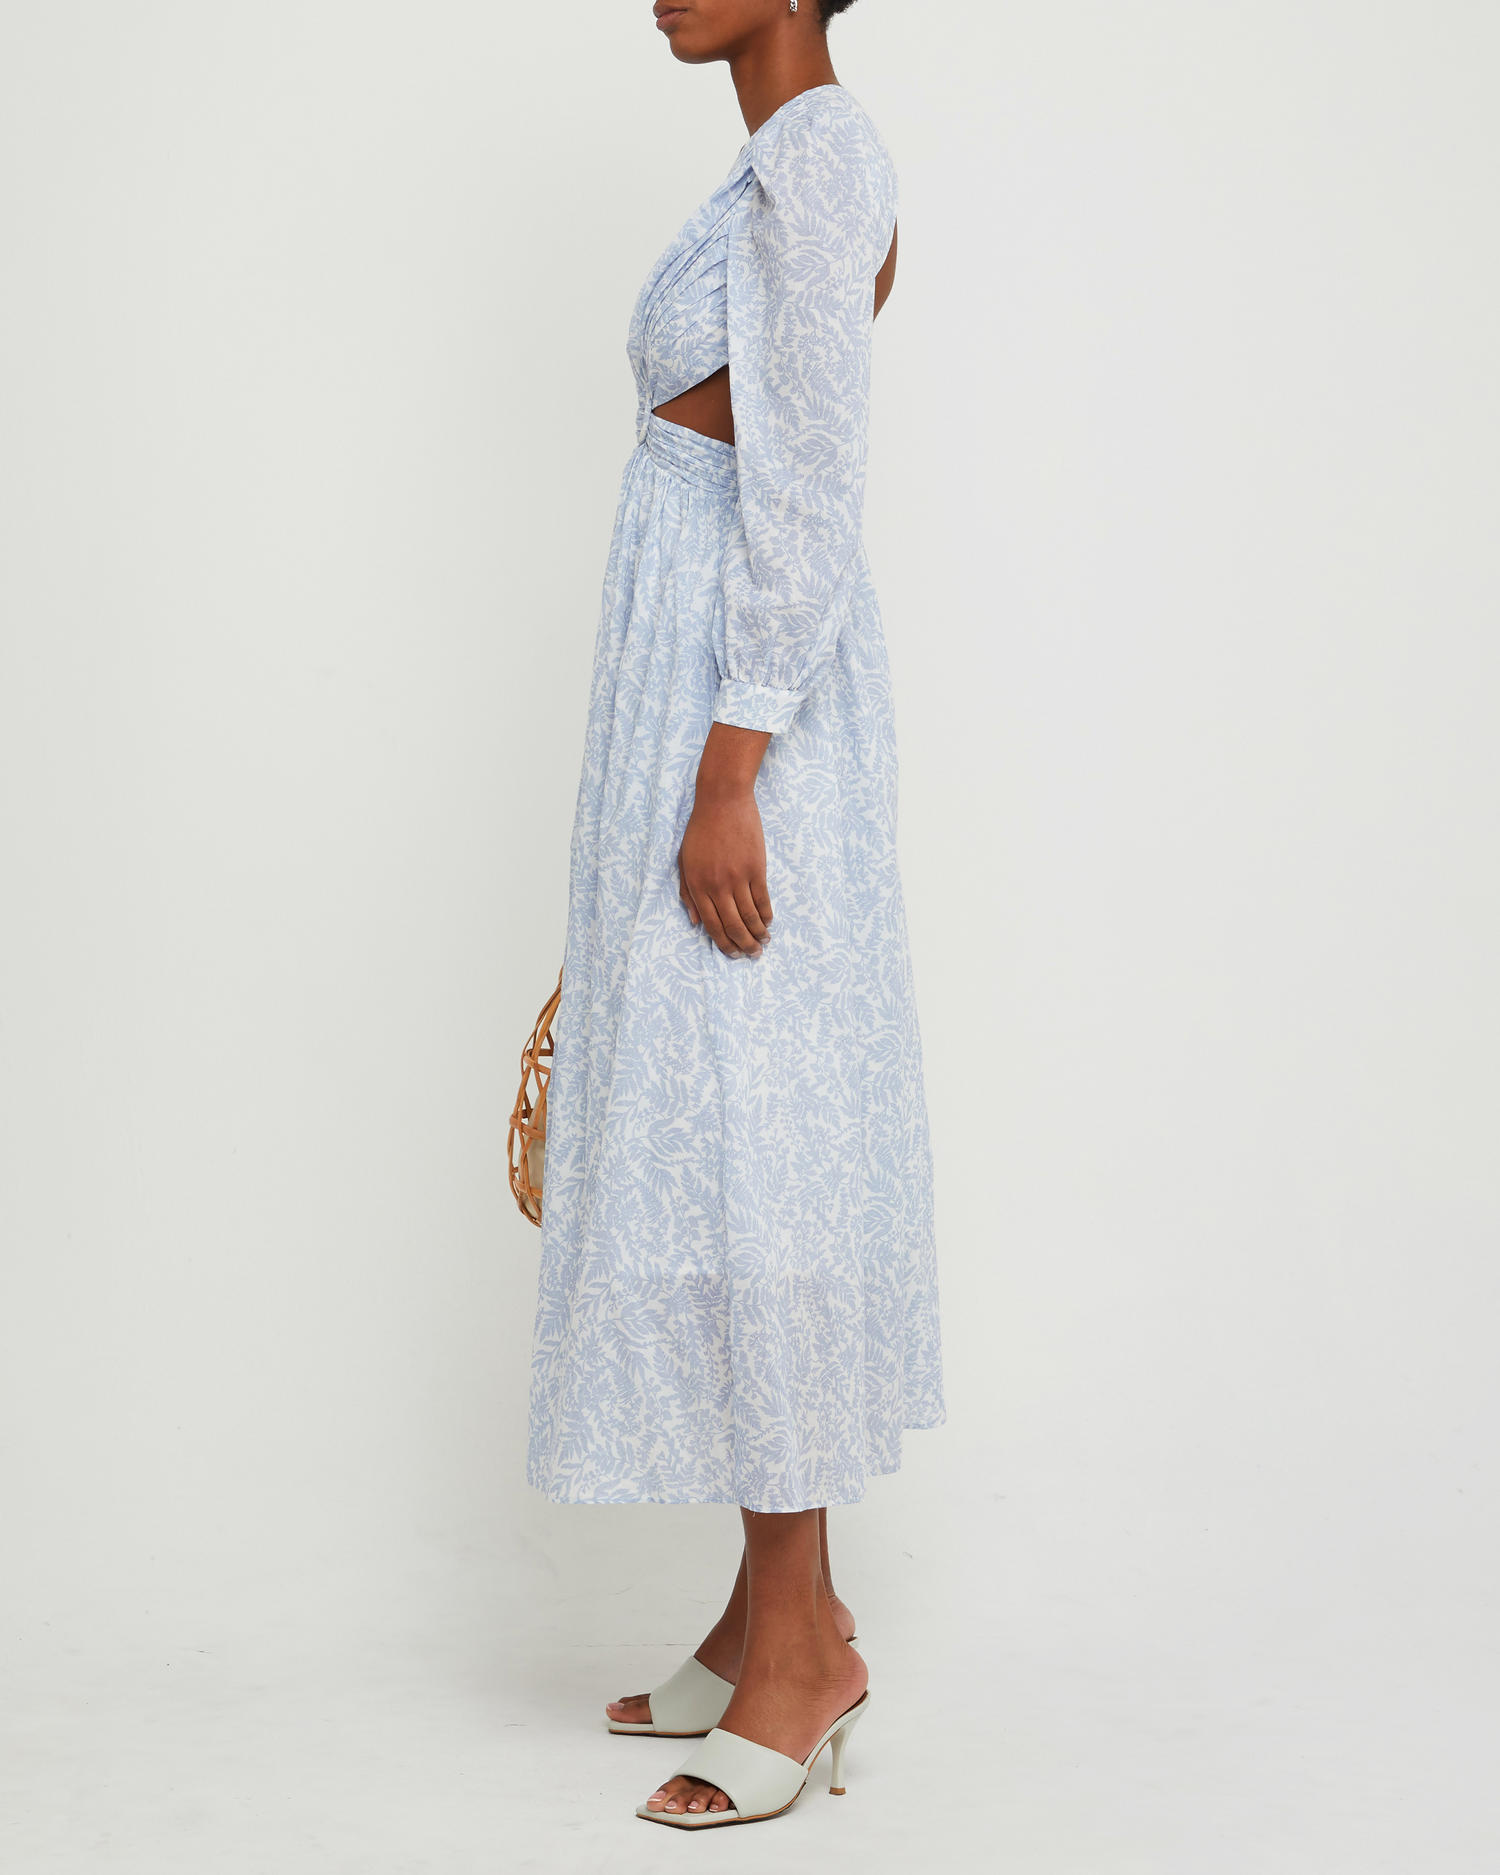 Third image of Kimia Cotton Dress, a blue maxi dress, open back, cut outs, V-neck, plunge, floral, long sleeves, puff sleeve